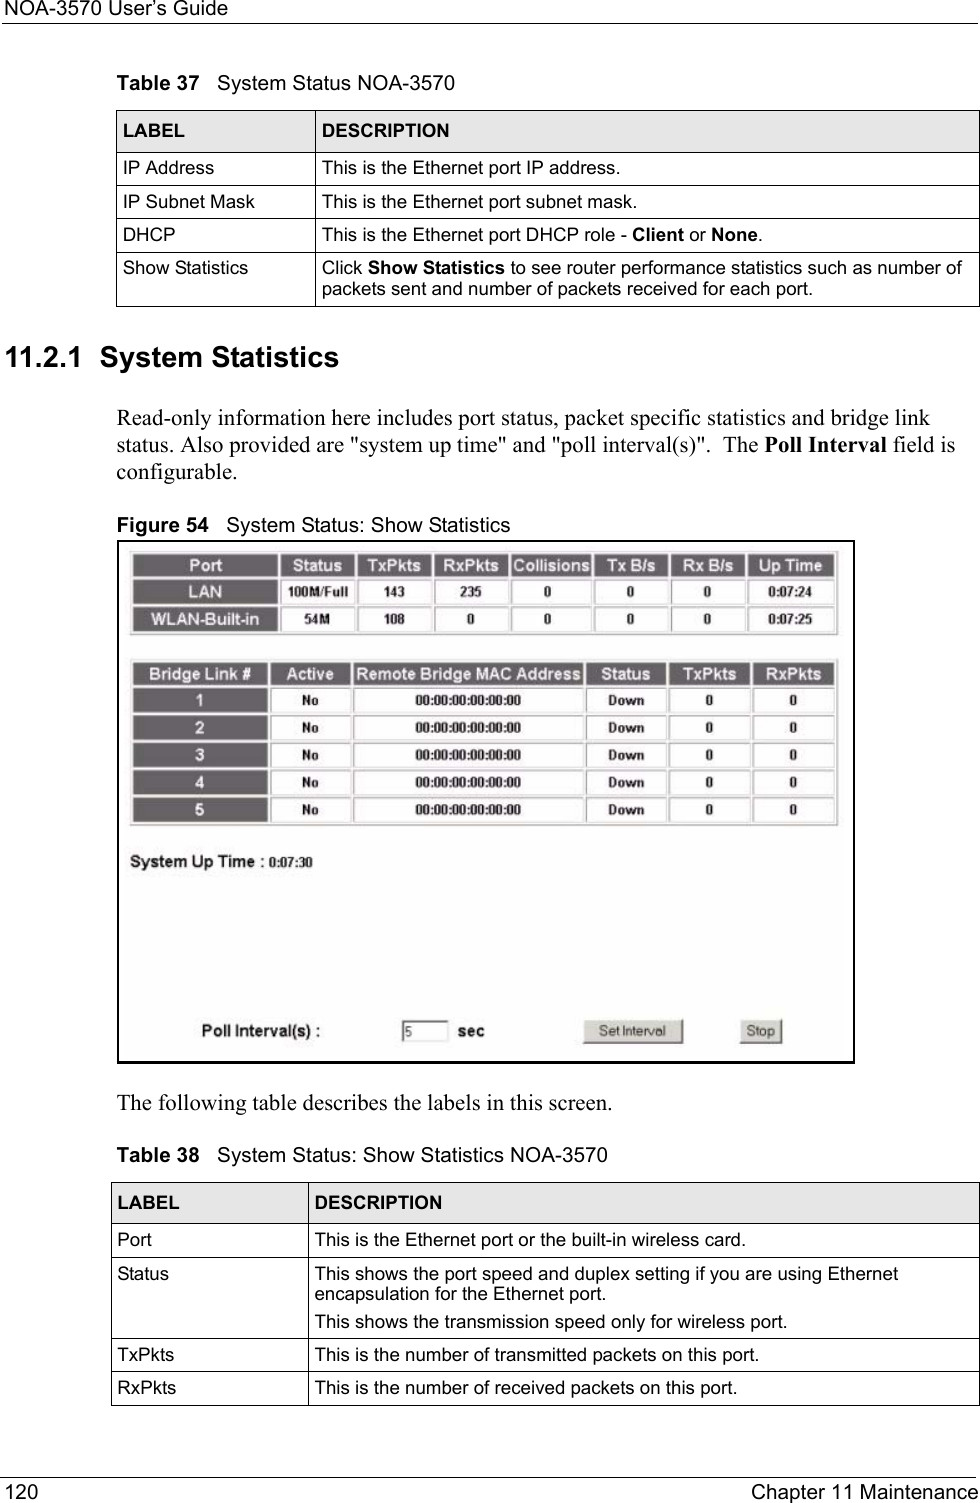 NOA-3570 User’s Guide120 Chapter 11 Maintenance11.2.1  System StatisticsRead-only information here includes port status, packet specific statistics and bridge link status. Also provided are &quot;system up time&quot; and &quot;poll interval(s)&quot;.  The Poll Interval field is configurable.Figure 54   System Status: Show StatisticsThe following table describes the labels in this screen.IP Address This is the Ethernet port IP address. IP Subnet Mask This is the Ethernet port subnet mask. DHCP This is the Ethernet port DHCP role - Client or None. Show Statistics Click Show Statistics to see router performance statistics such as number of packets sent and number of packets received for each port.Table 37   System Status NOA-3570LABEL DESCRIPTIONTable 38   System Status: Show Statistics NOA-3570LABEL DESCRIPTIONPort This is the Ethernet port or the built-in wireless card.  Status This shows the port speed and duplex setting if you are using Ethernet encapsulation for the Ethernet port.This shows the transmission speed only for wireless port.TxPkts This is the number of transmitted packets on this port.RxPkts This is the number of received packets on this port.